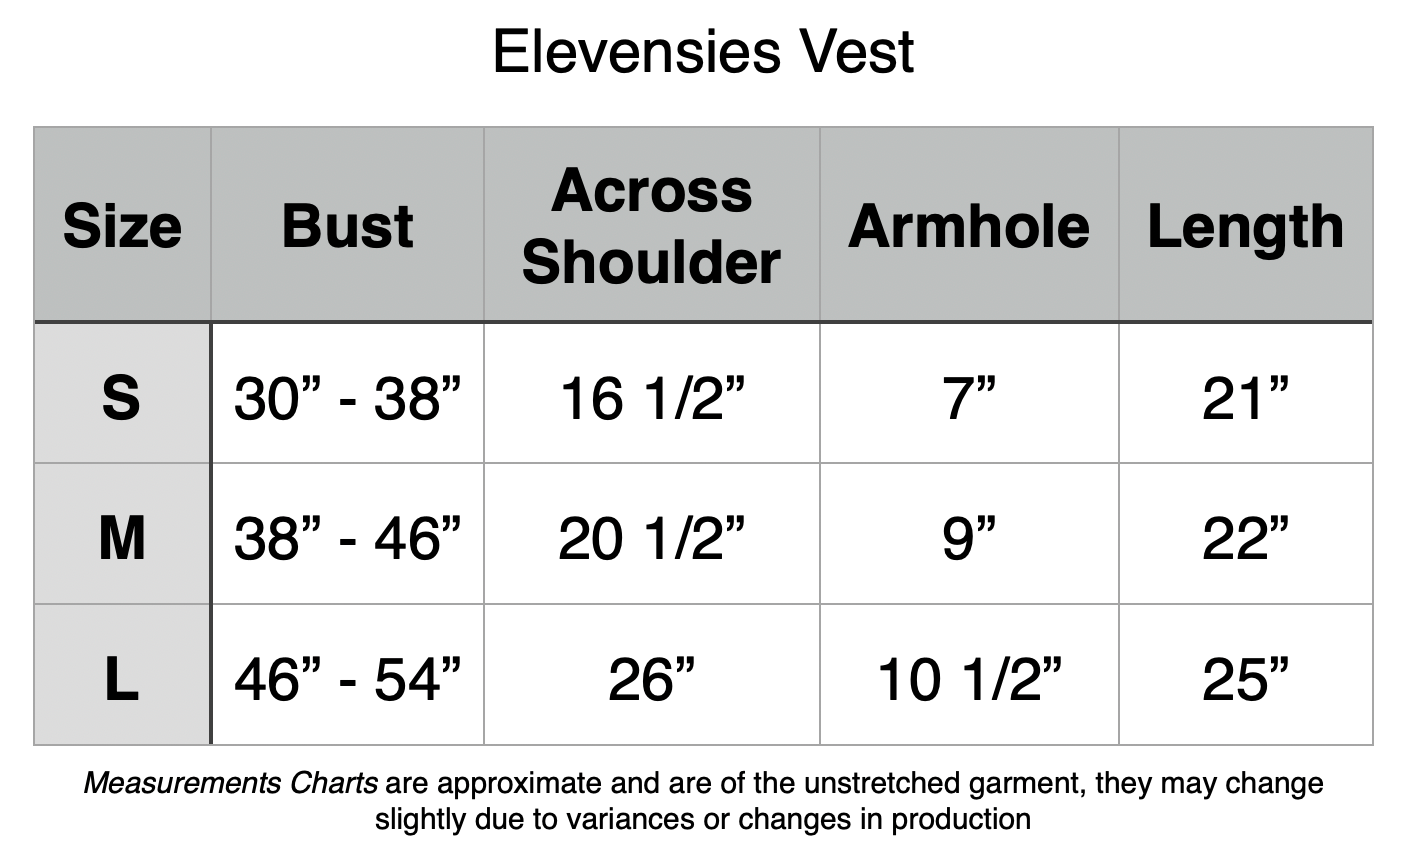 Elevensies Vests: Small - 30” to 38” Bust, 16.5” Across Shoulders. 7” Armhole, 21” Length. Medium - 38” to 46” Bust, 20.5” Across Shoulders. 9” Armhole, 22” Length. Medium - 46” to 54” Bust, 26” Across Shoulders. 10.5” Armhole, 25” Length.